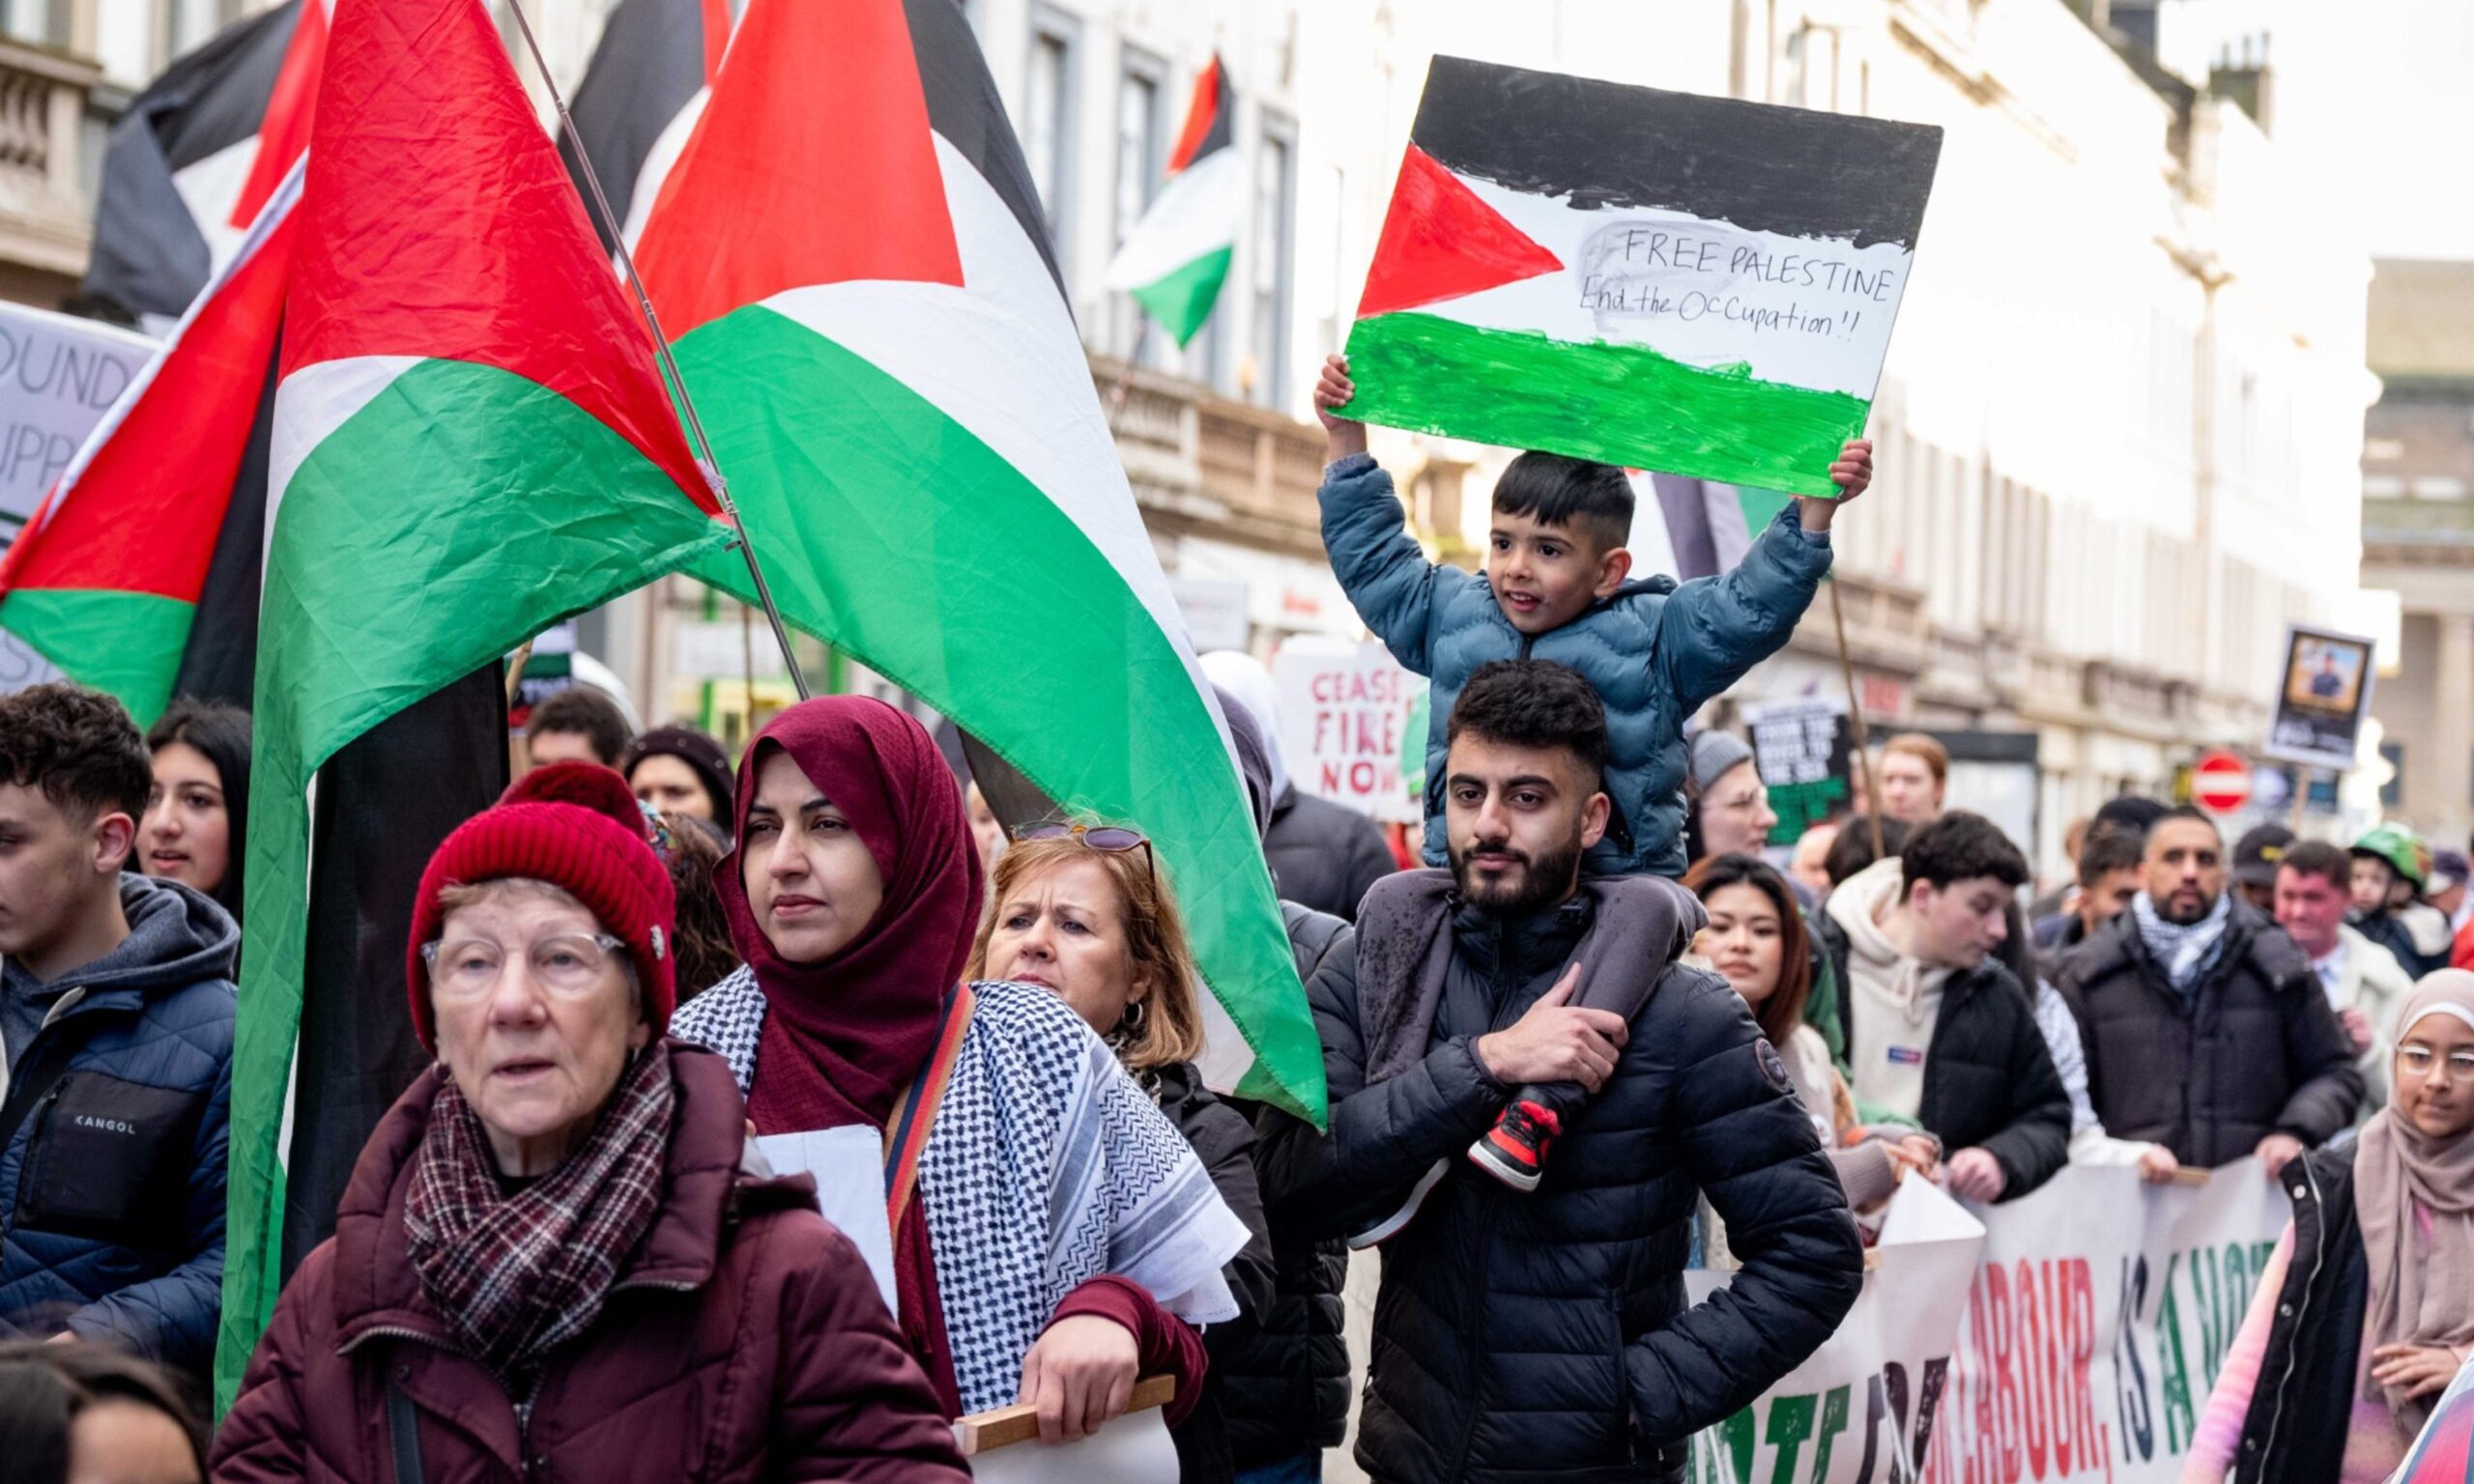 Pro-Palestine rally in Dundee city centre on Saturday March 2. Image: Paul Reid